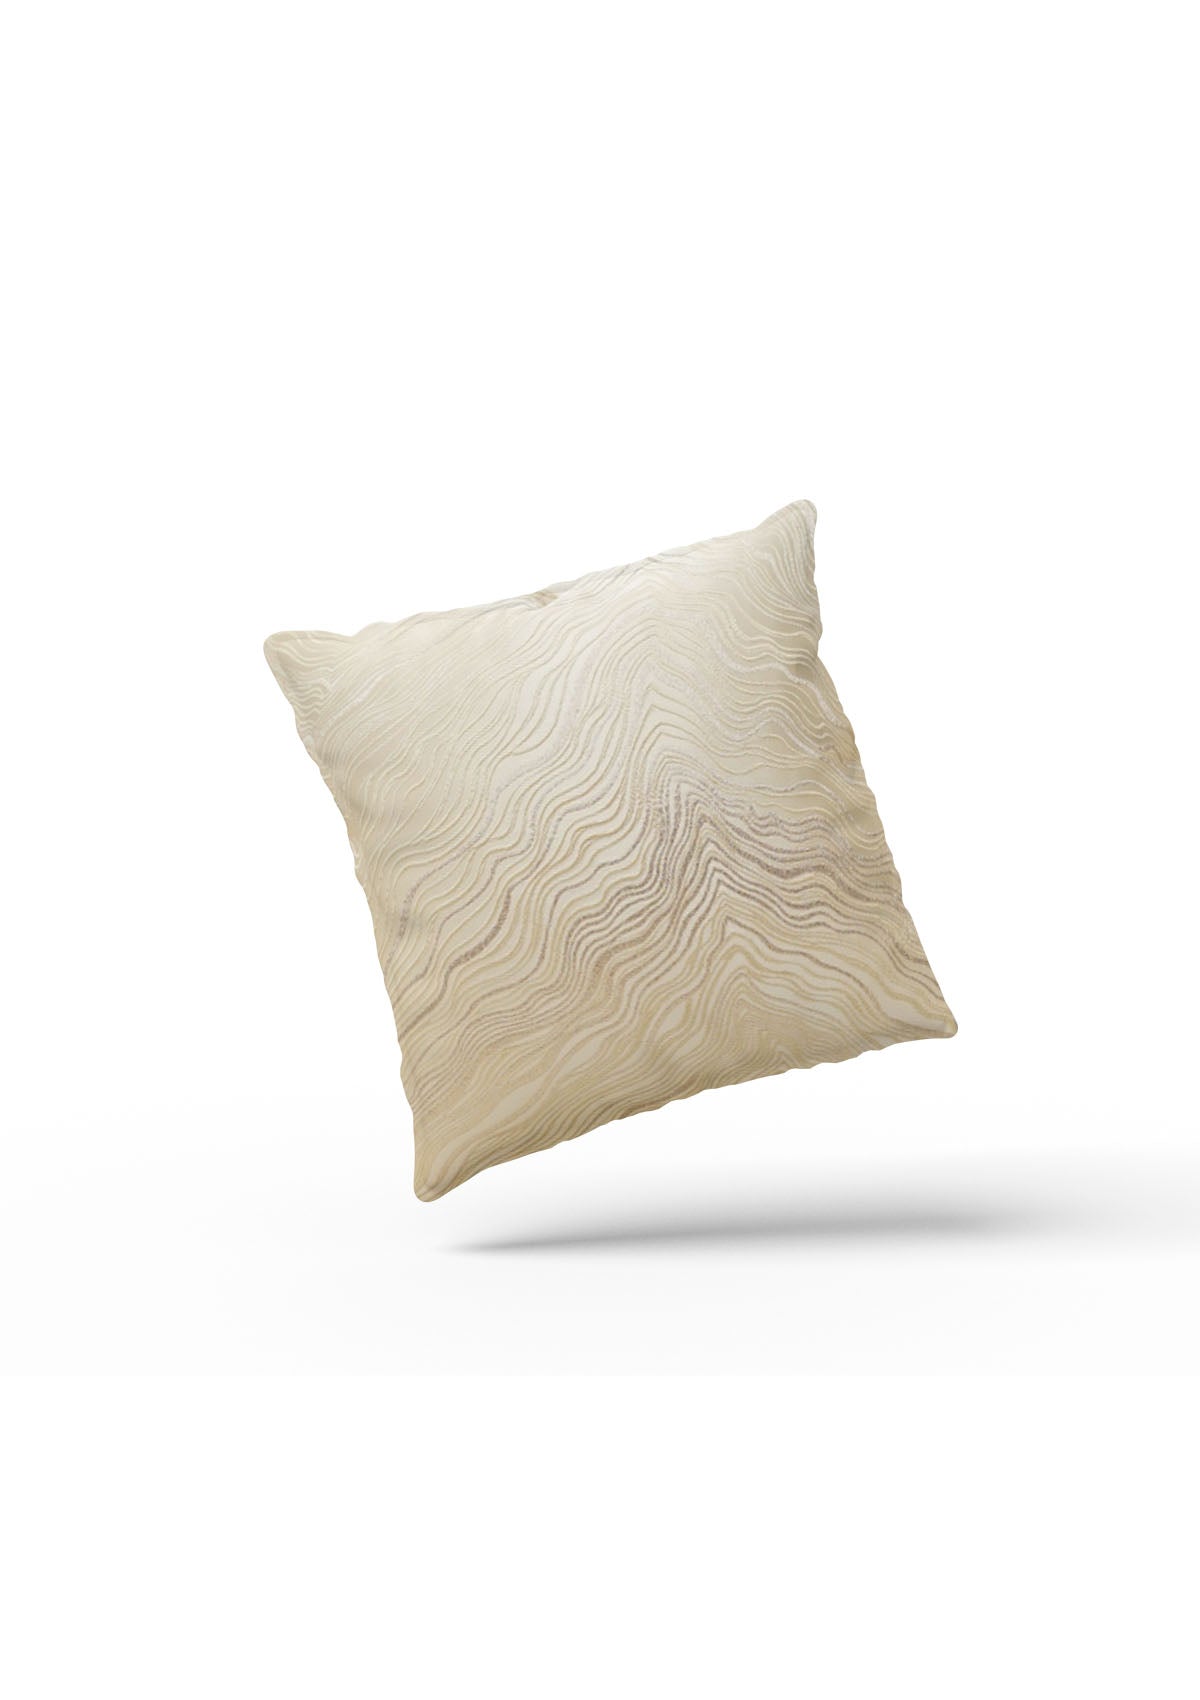 Sophisticated beige and gold cushion cover with textured fabric